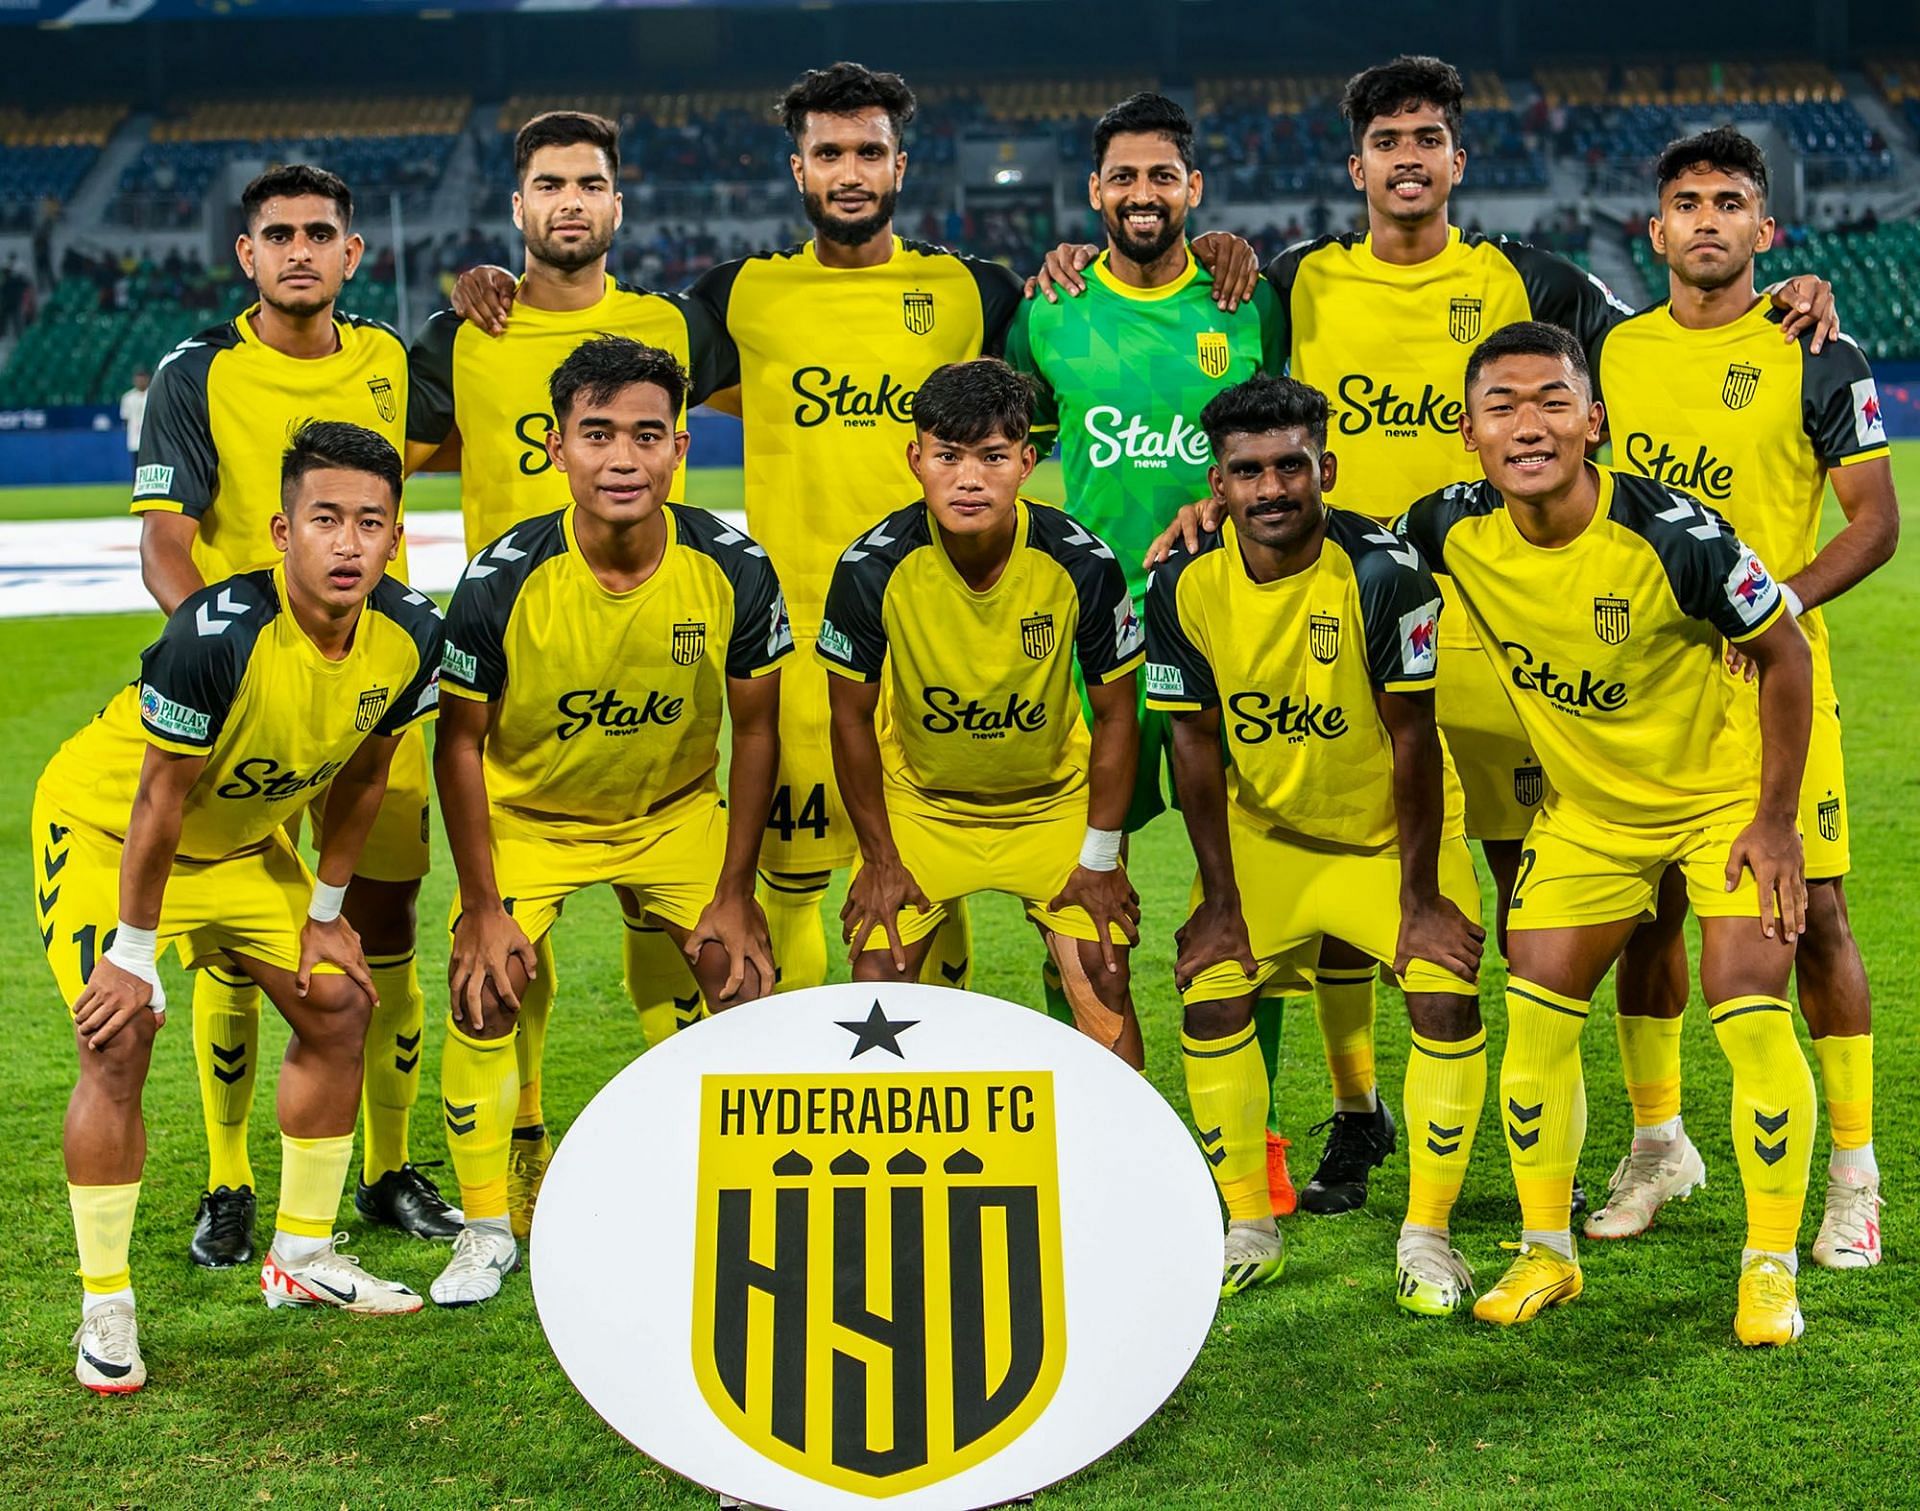 The historic Hyderabad FC team that won the first-ever game in the ISL with an all-Indian contingent.